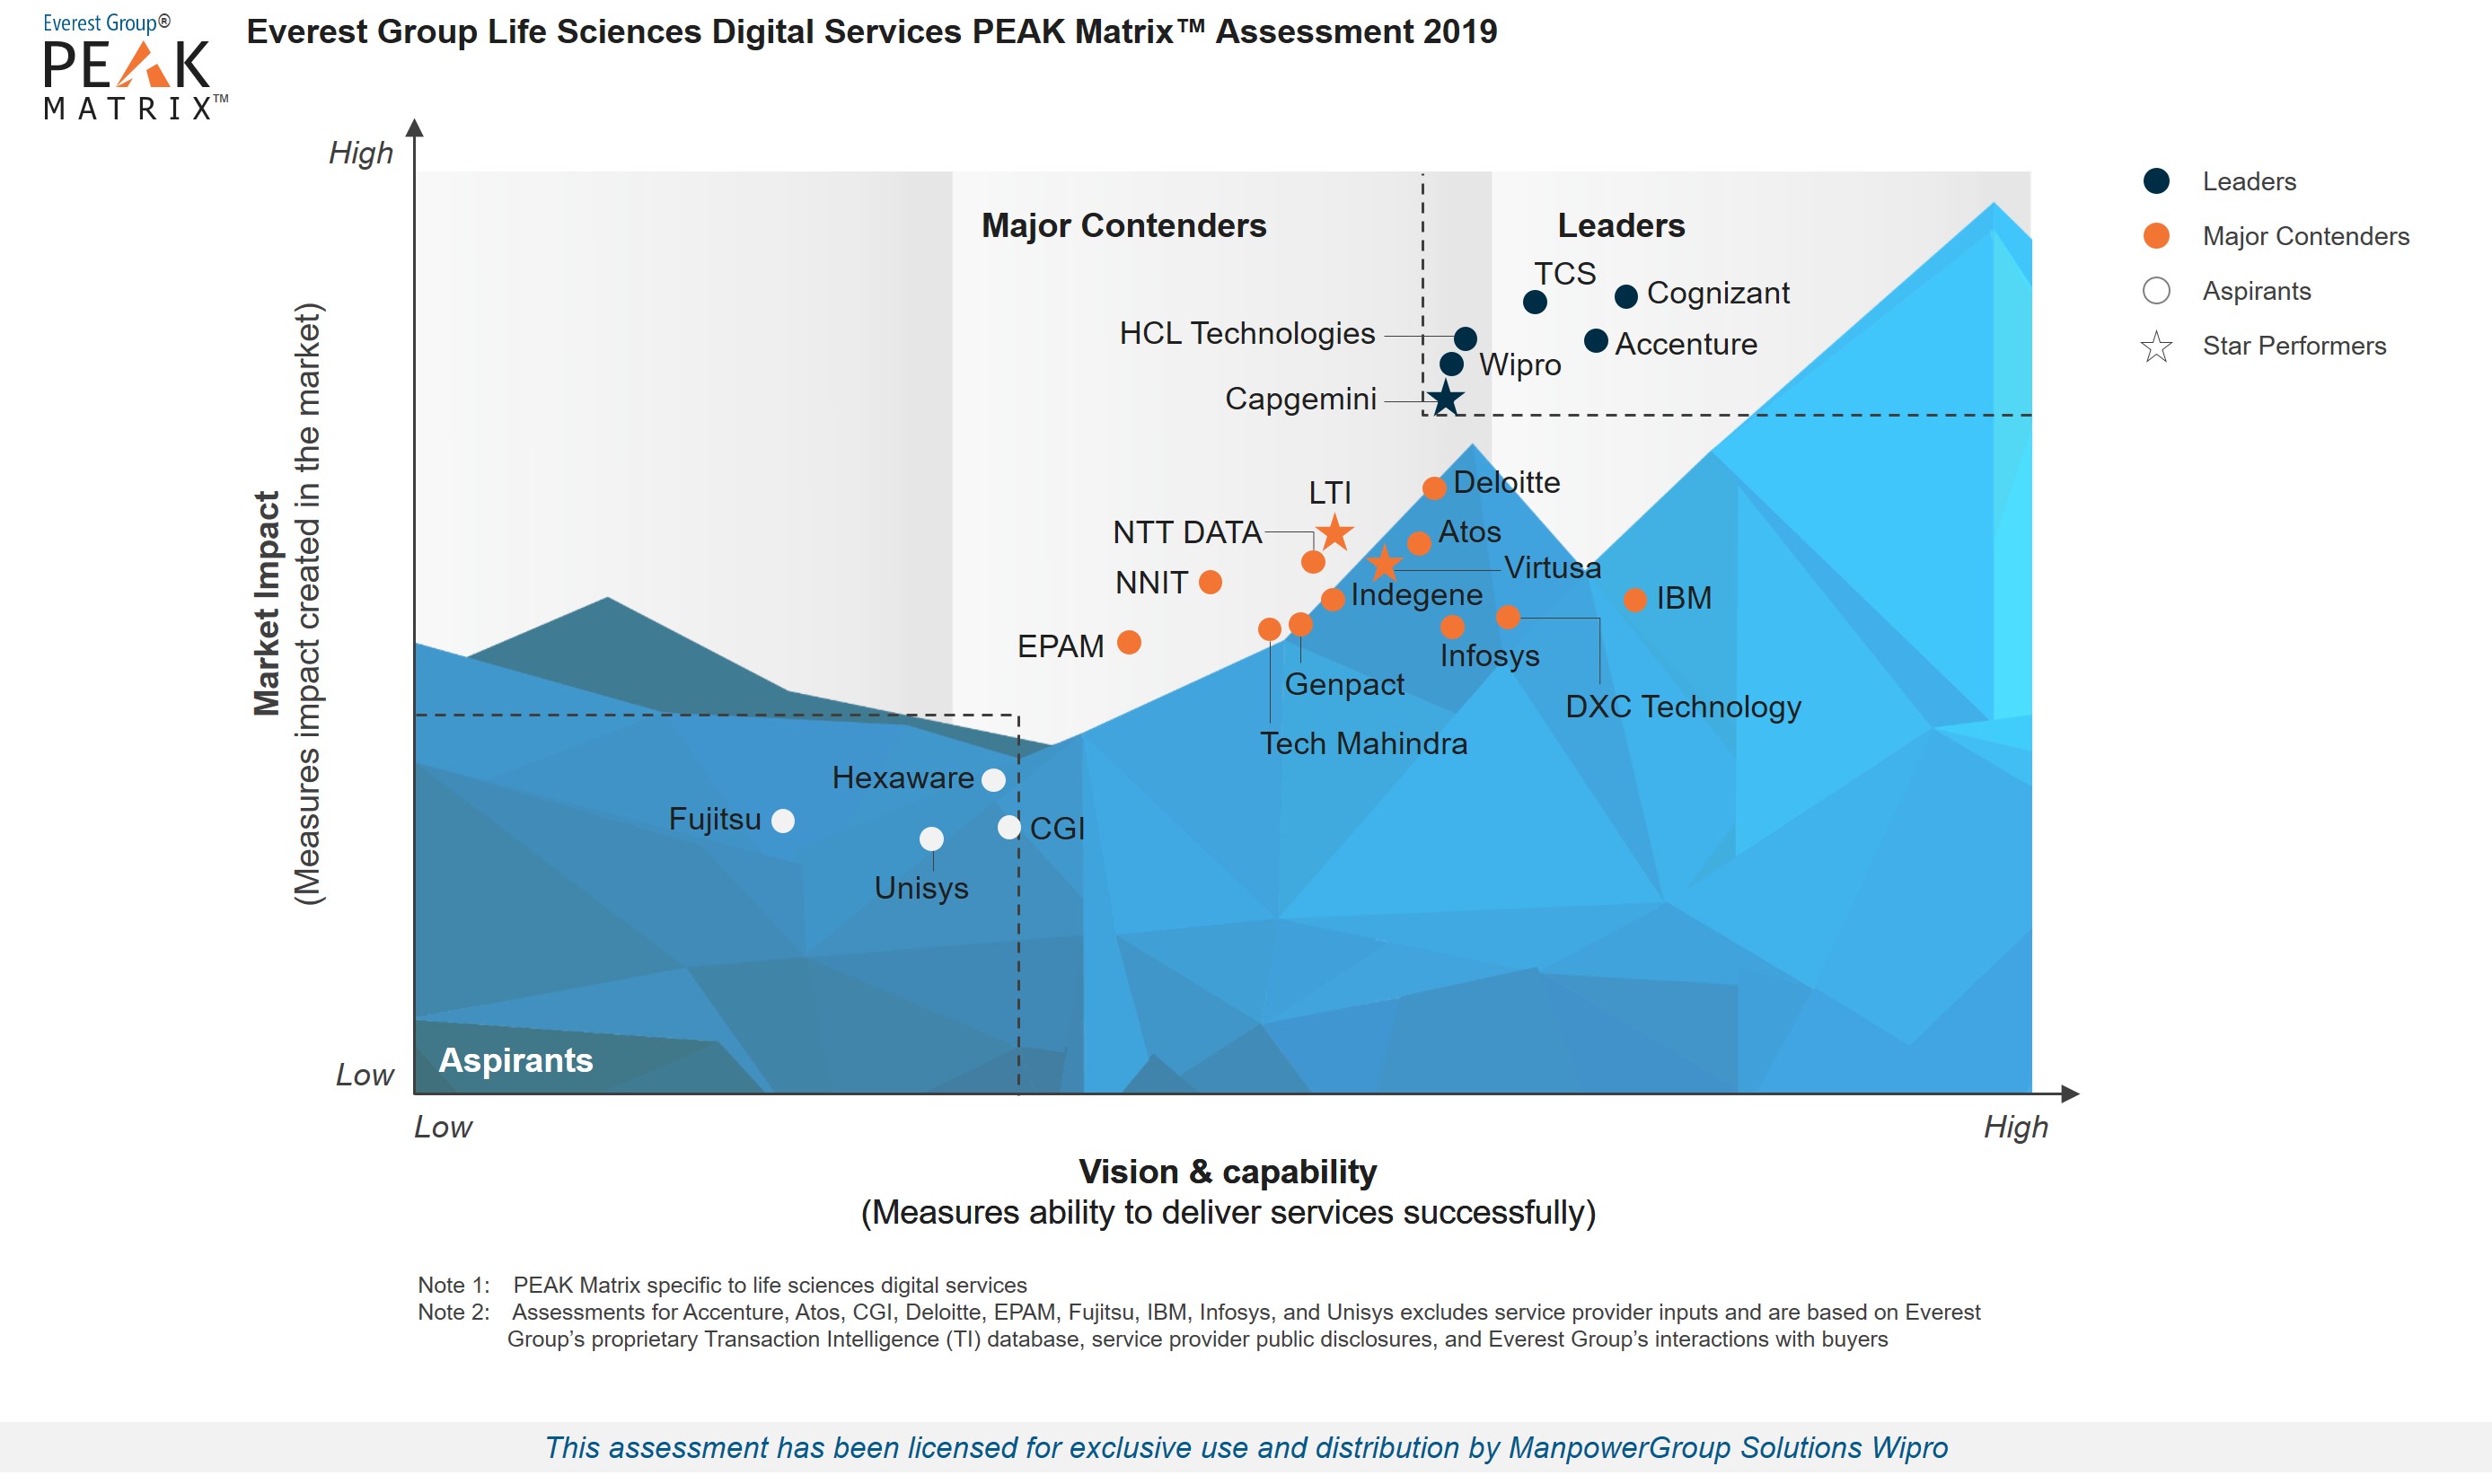 Wipro recognized as a Leader in Life Sciences Digital Services